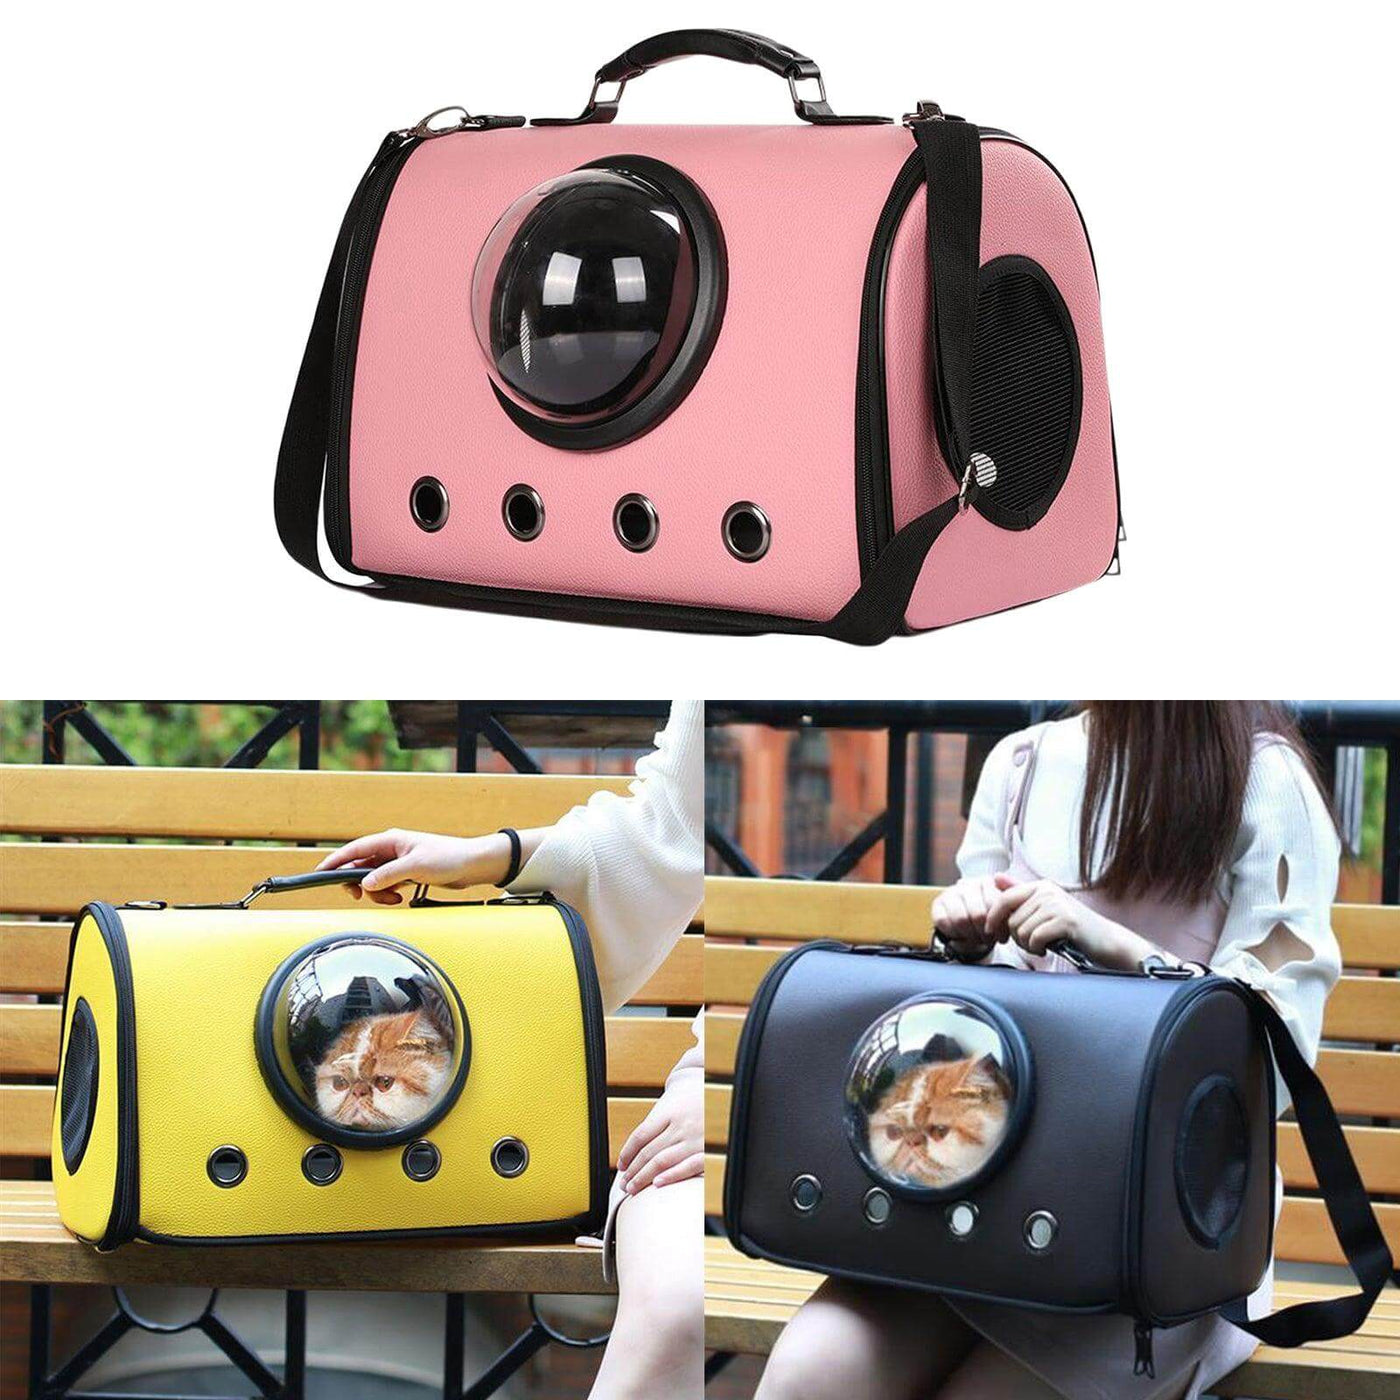 pet carrier for small dogs, cats puppies - Mamzoo | Your Pet's Favorite Store